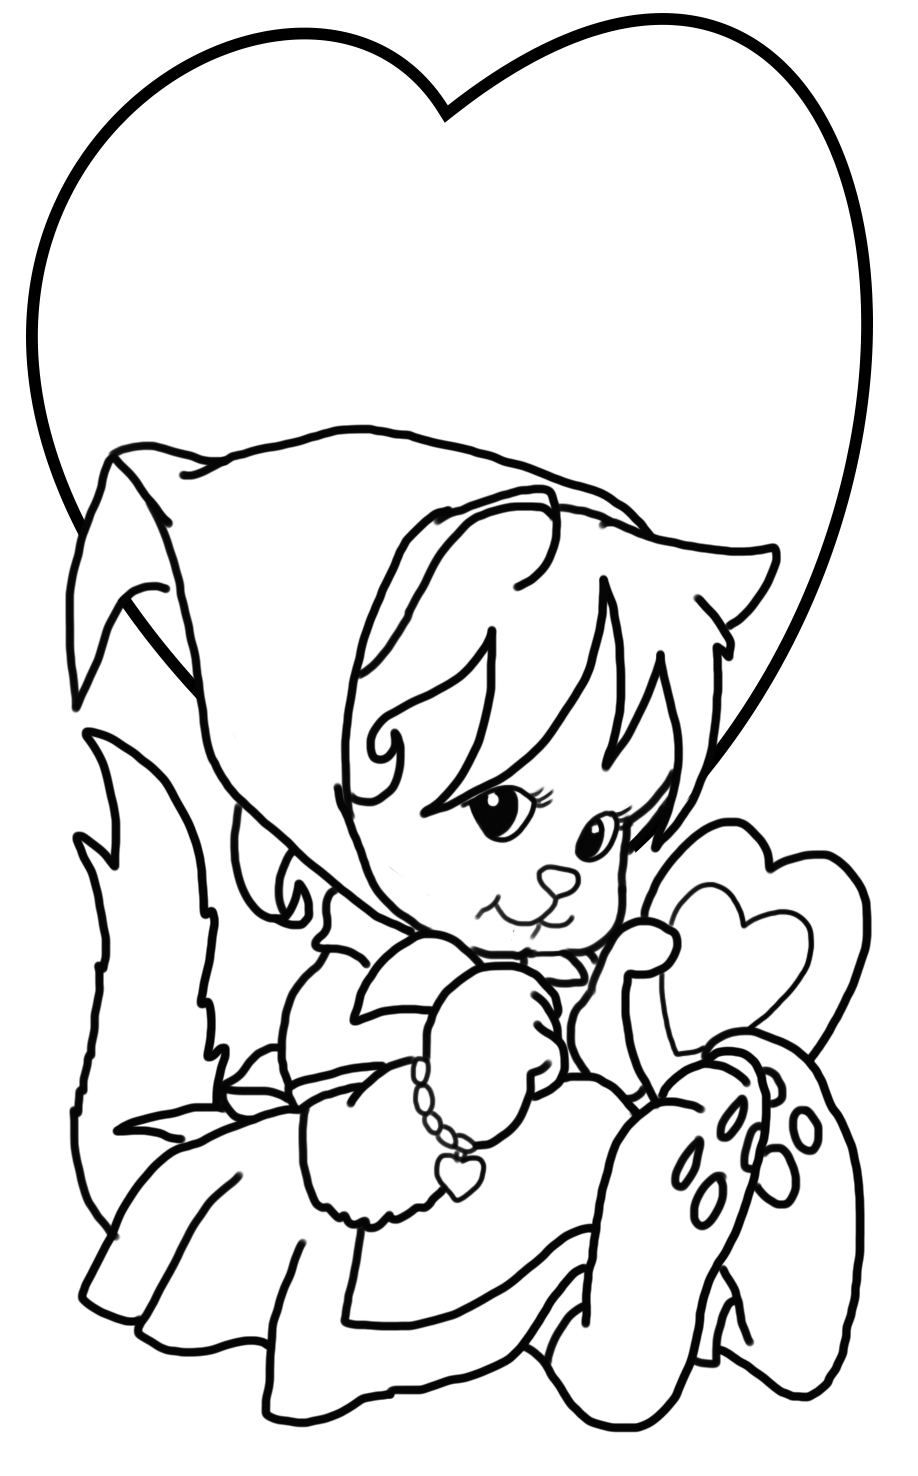 Valentine coloring page with cat and hearts